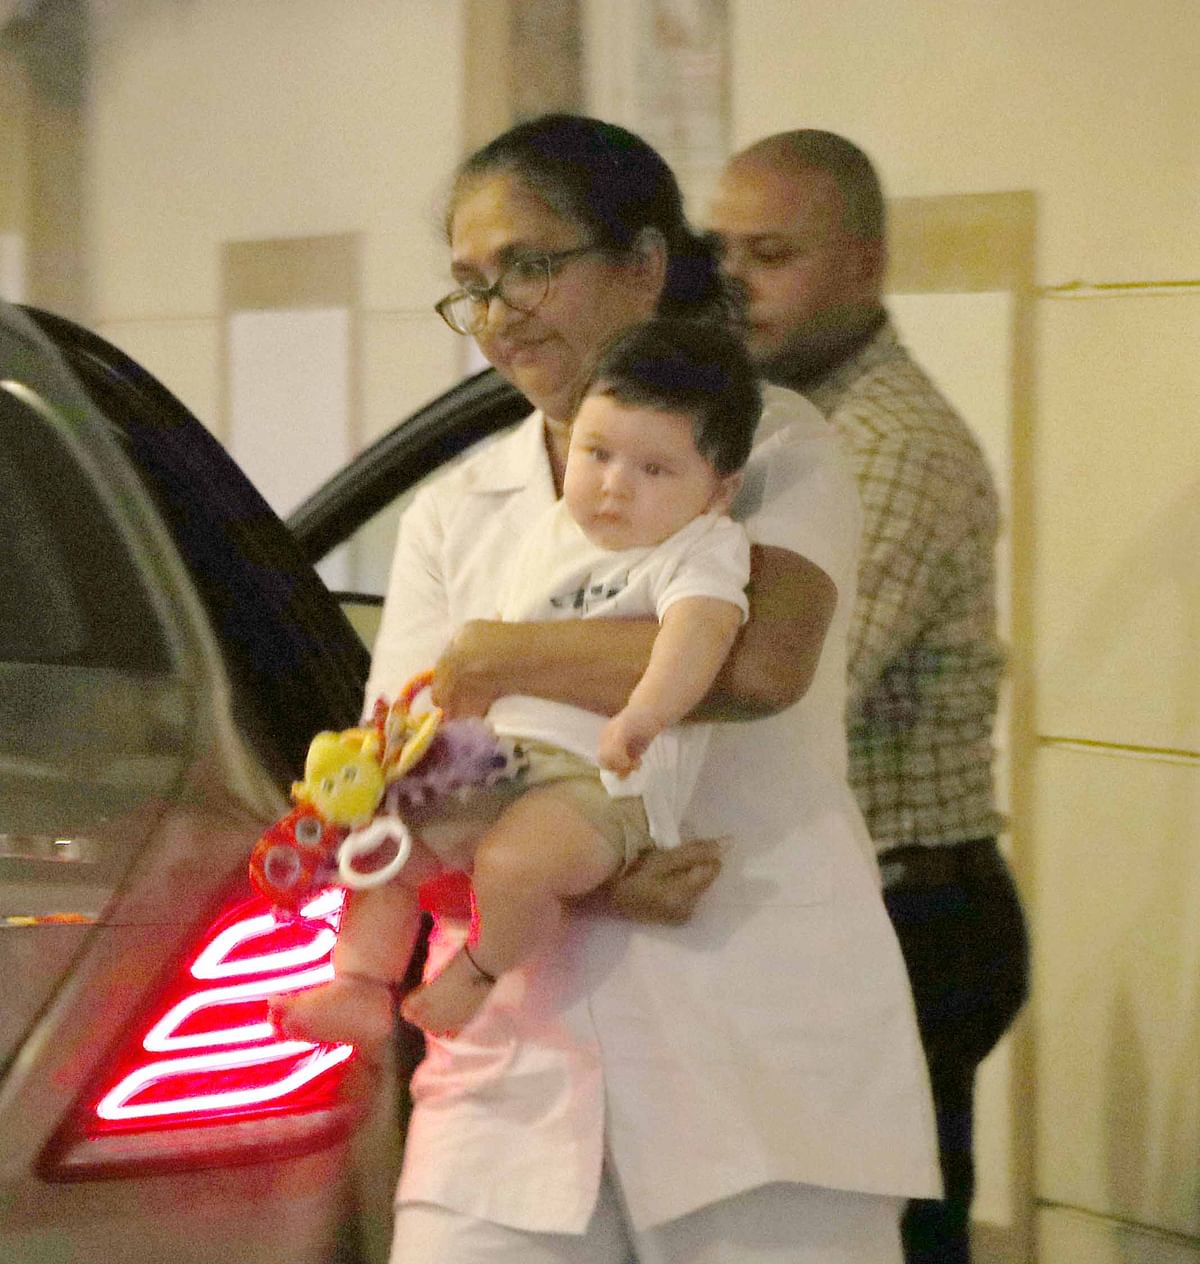 Check out these adorable pictures of baby Taimur Ali Khan.